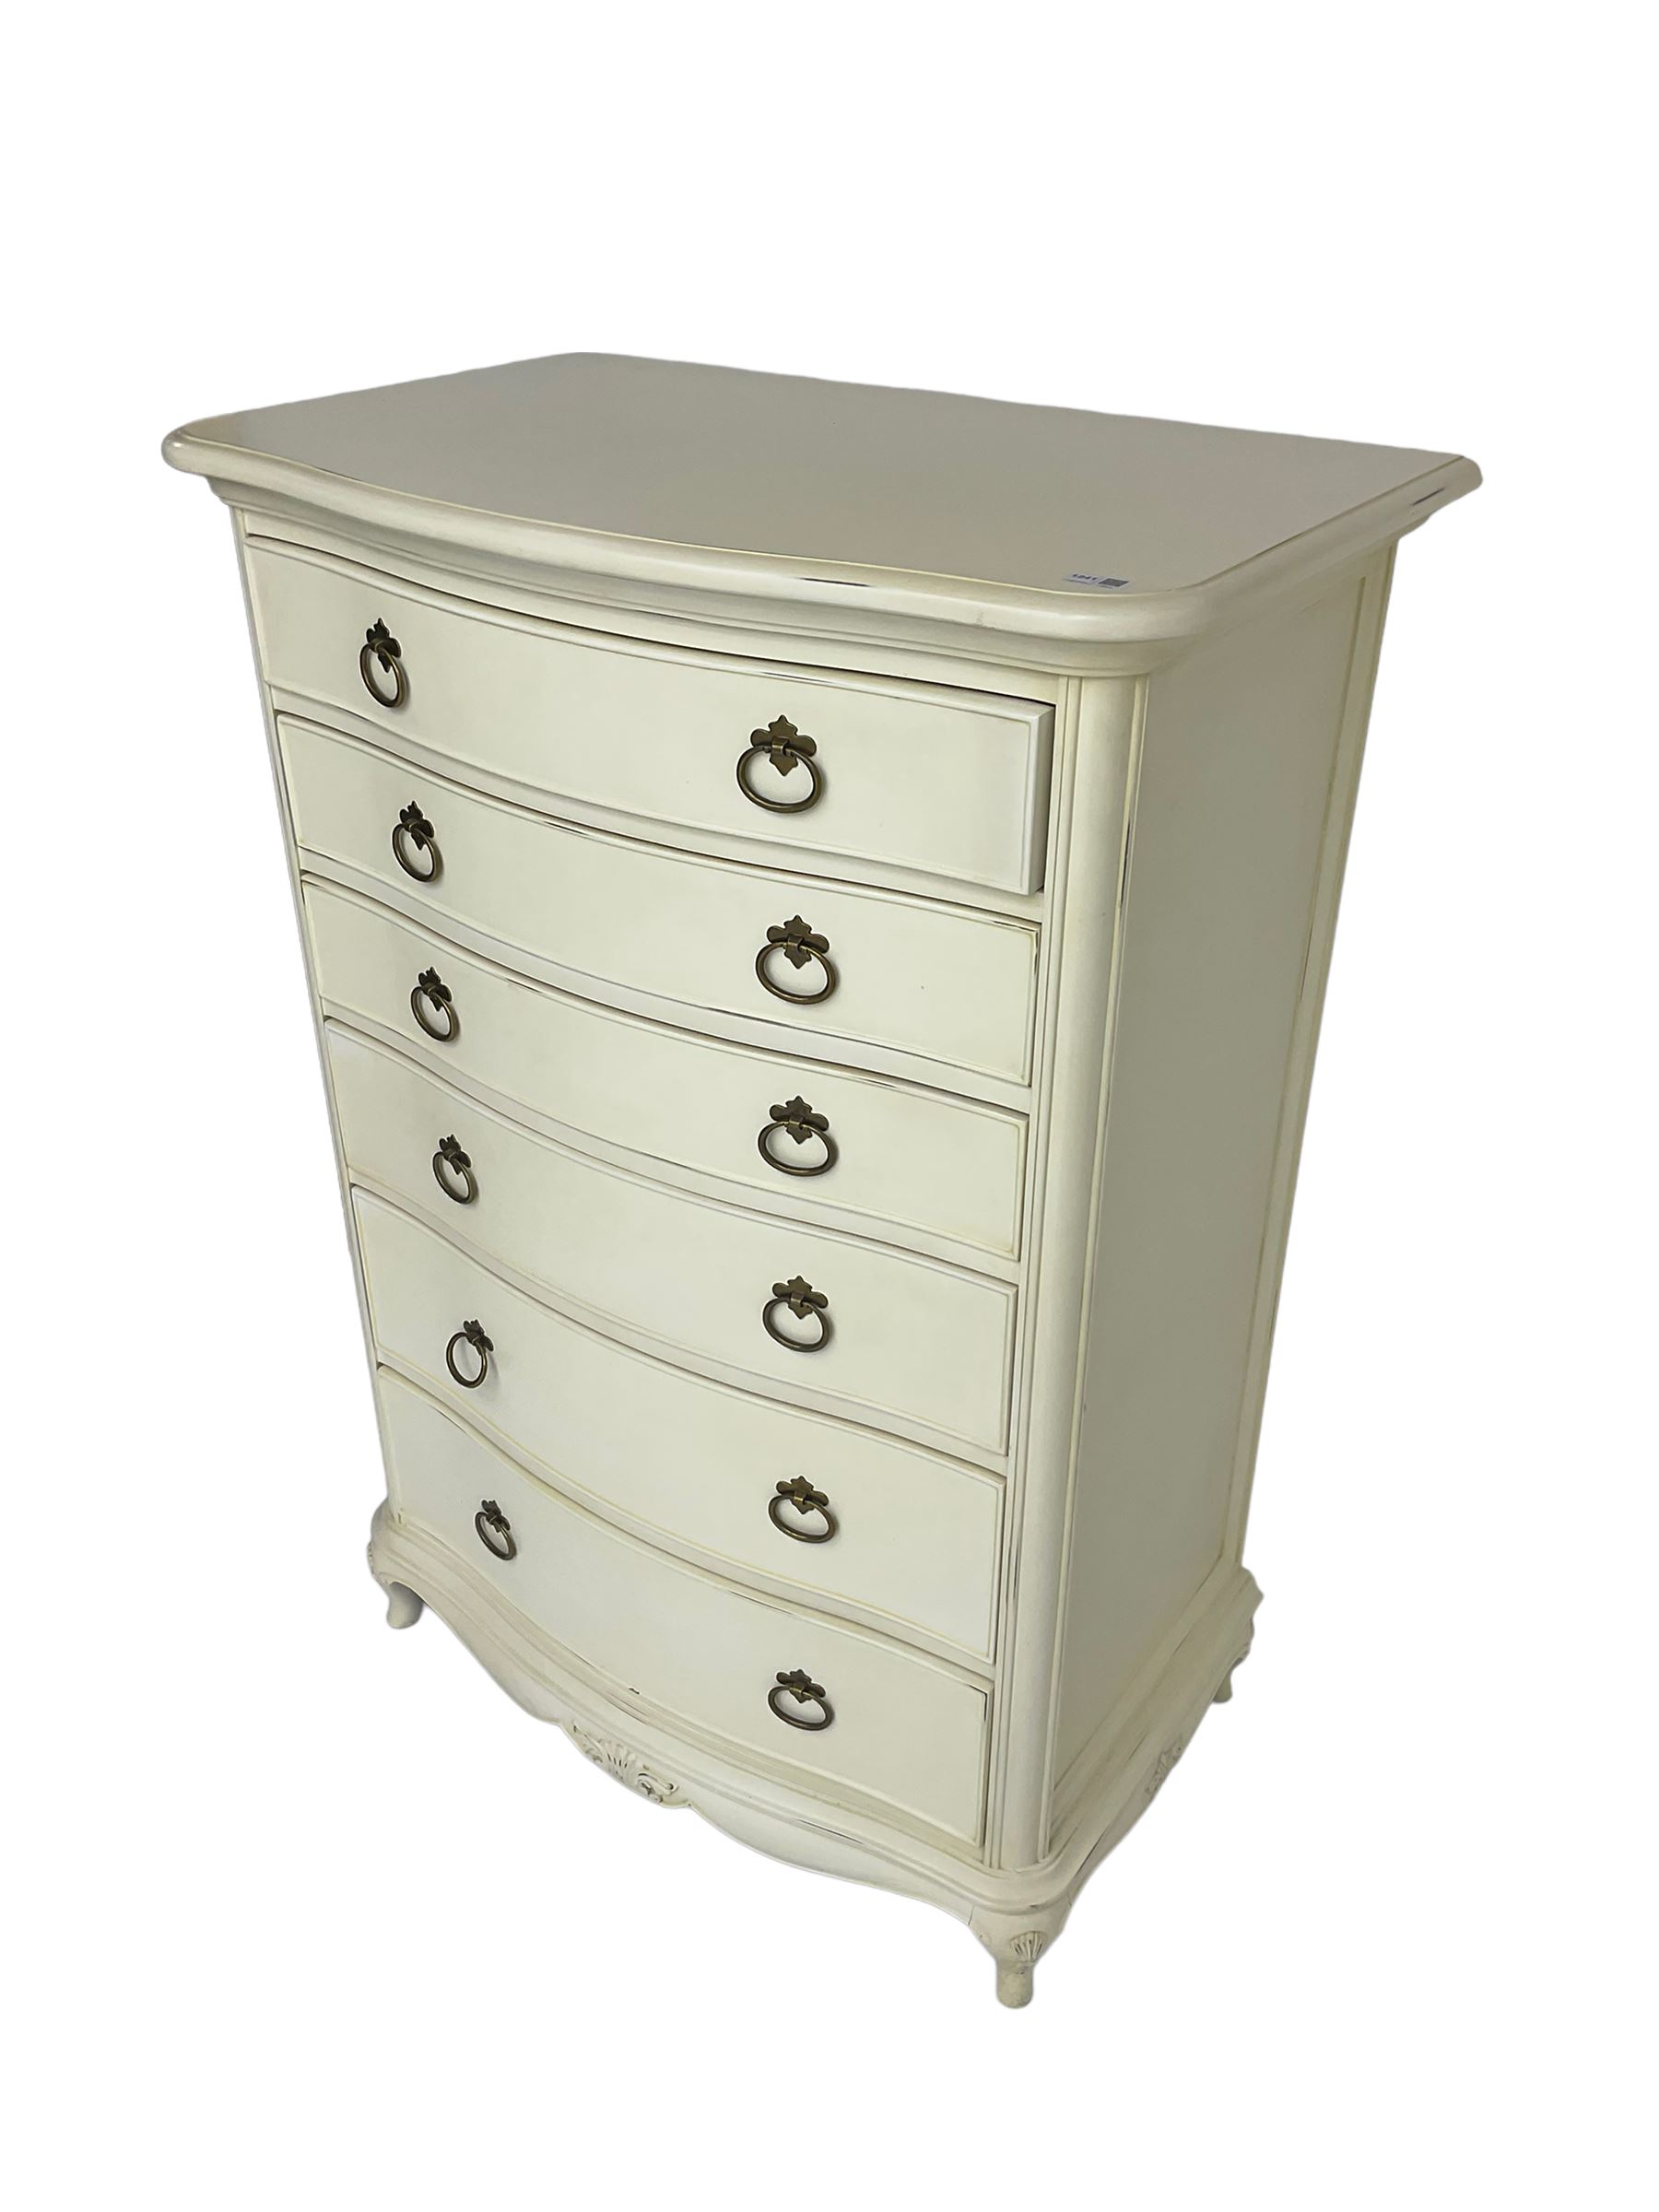 Willis and Gambier - chest fitted with graduating drawers - Image 5 of 6